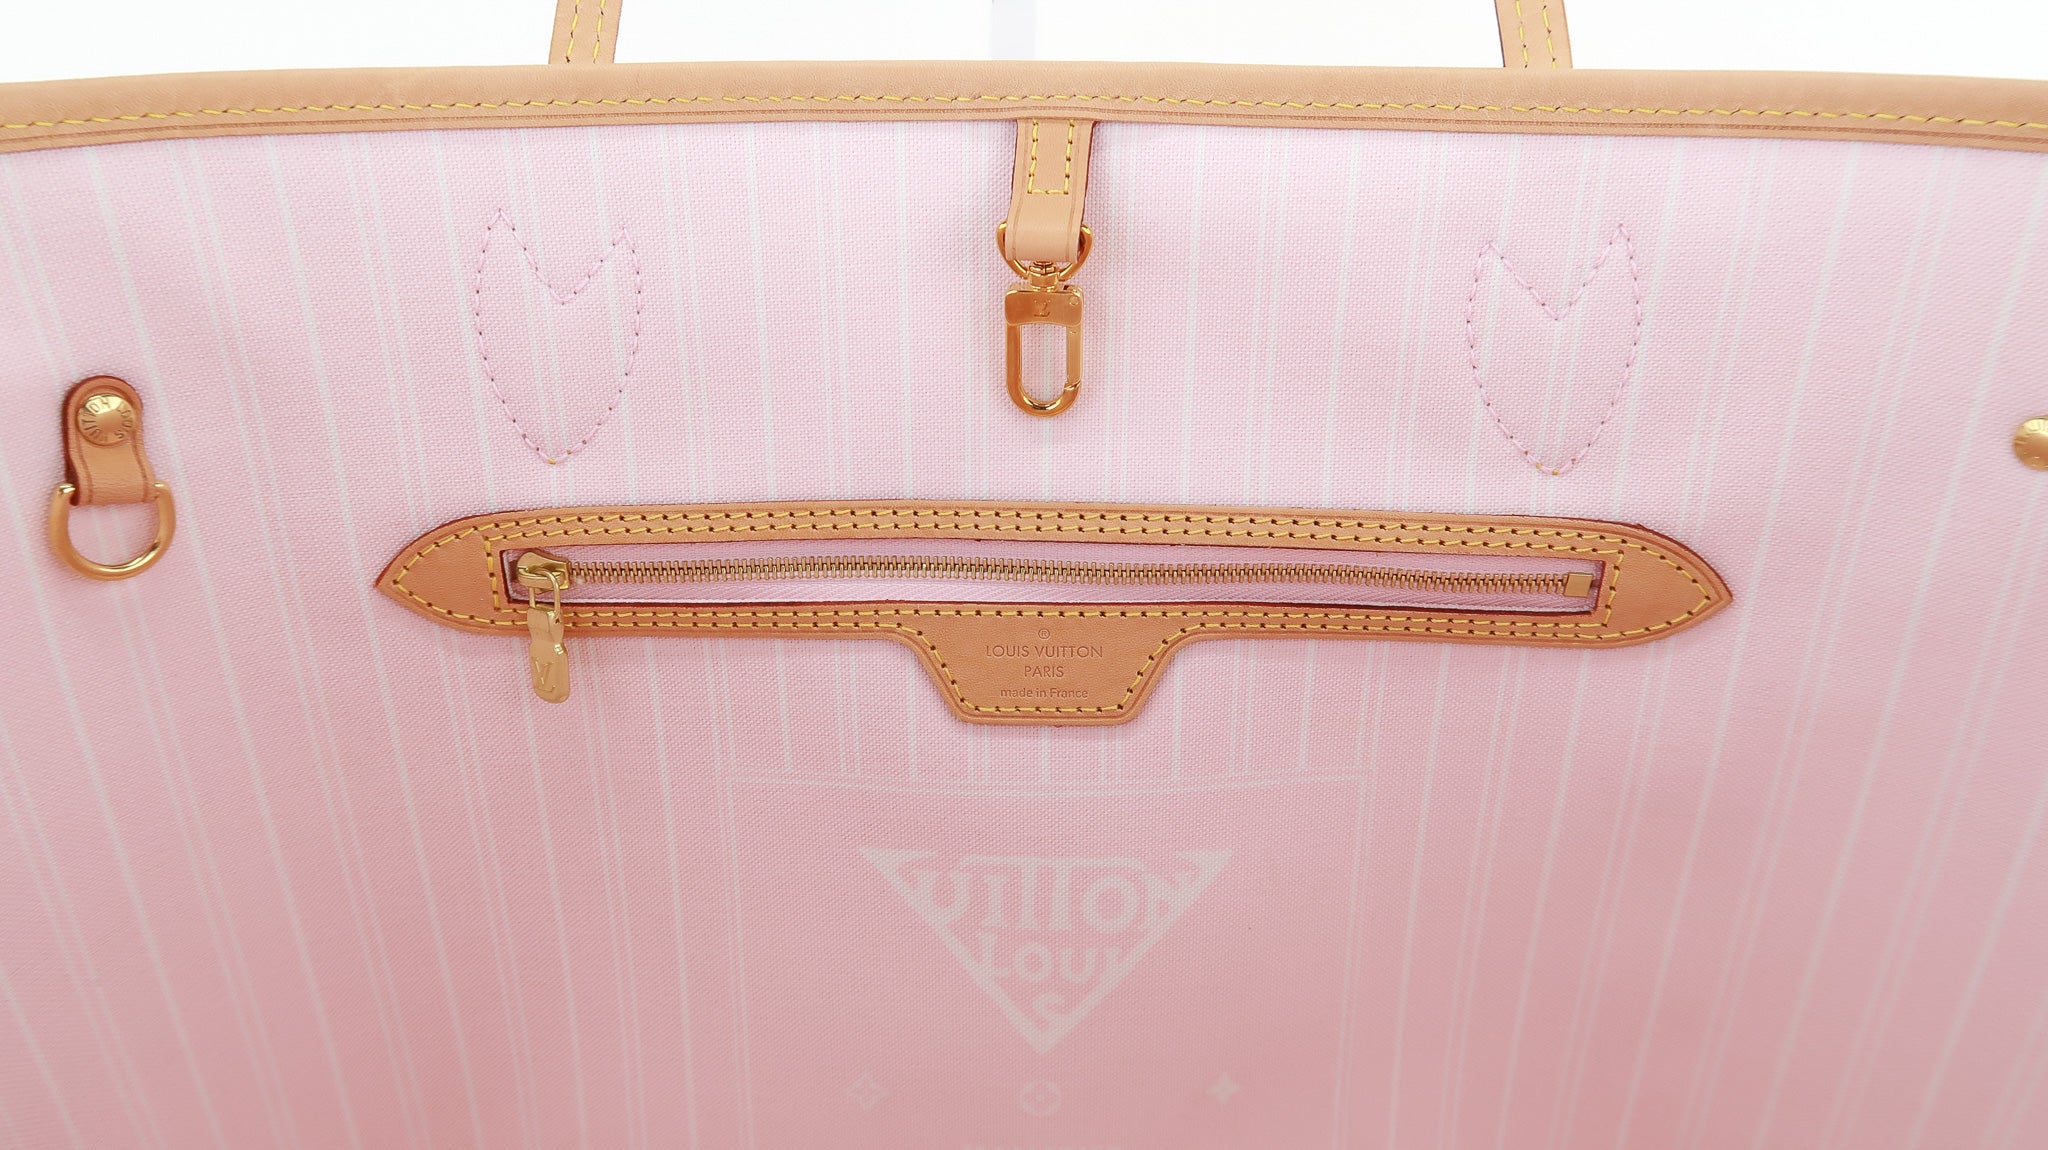 LOUIS VUITTON Monogram Giant By The Pool Neverfull MM Light Pink 1253303